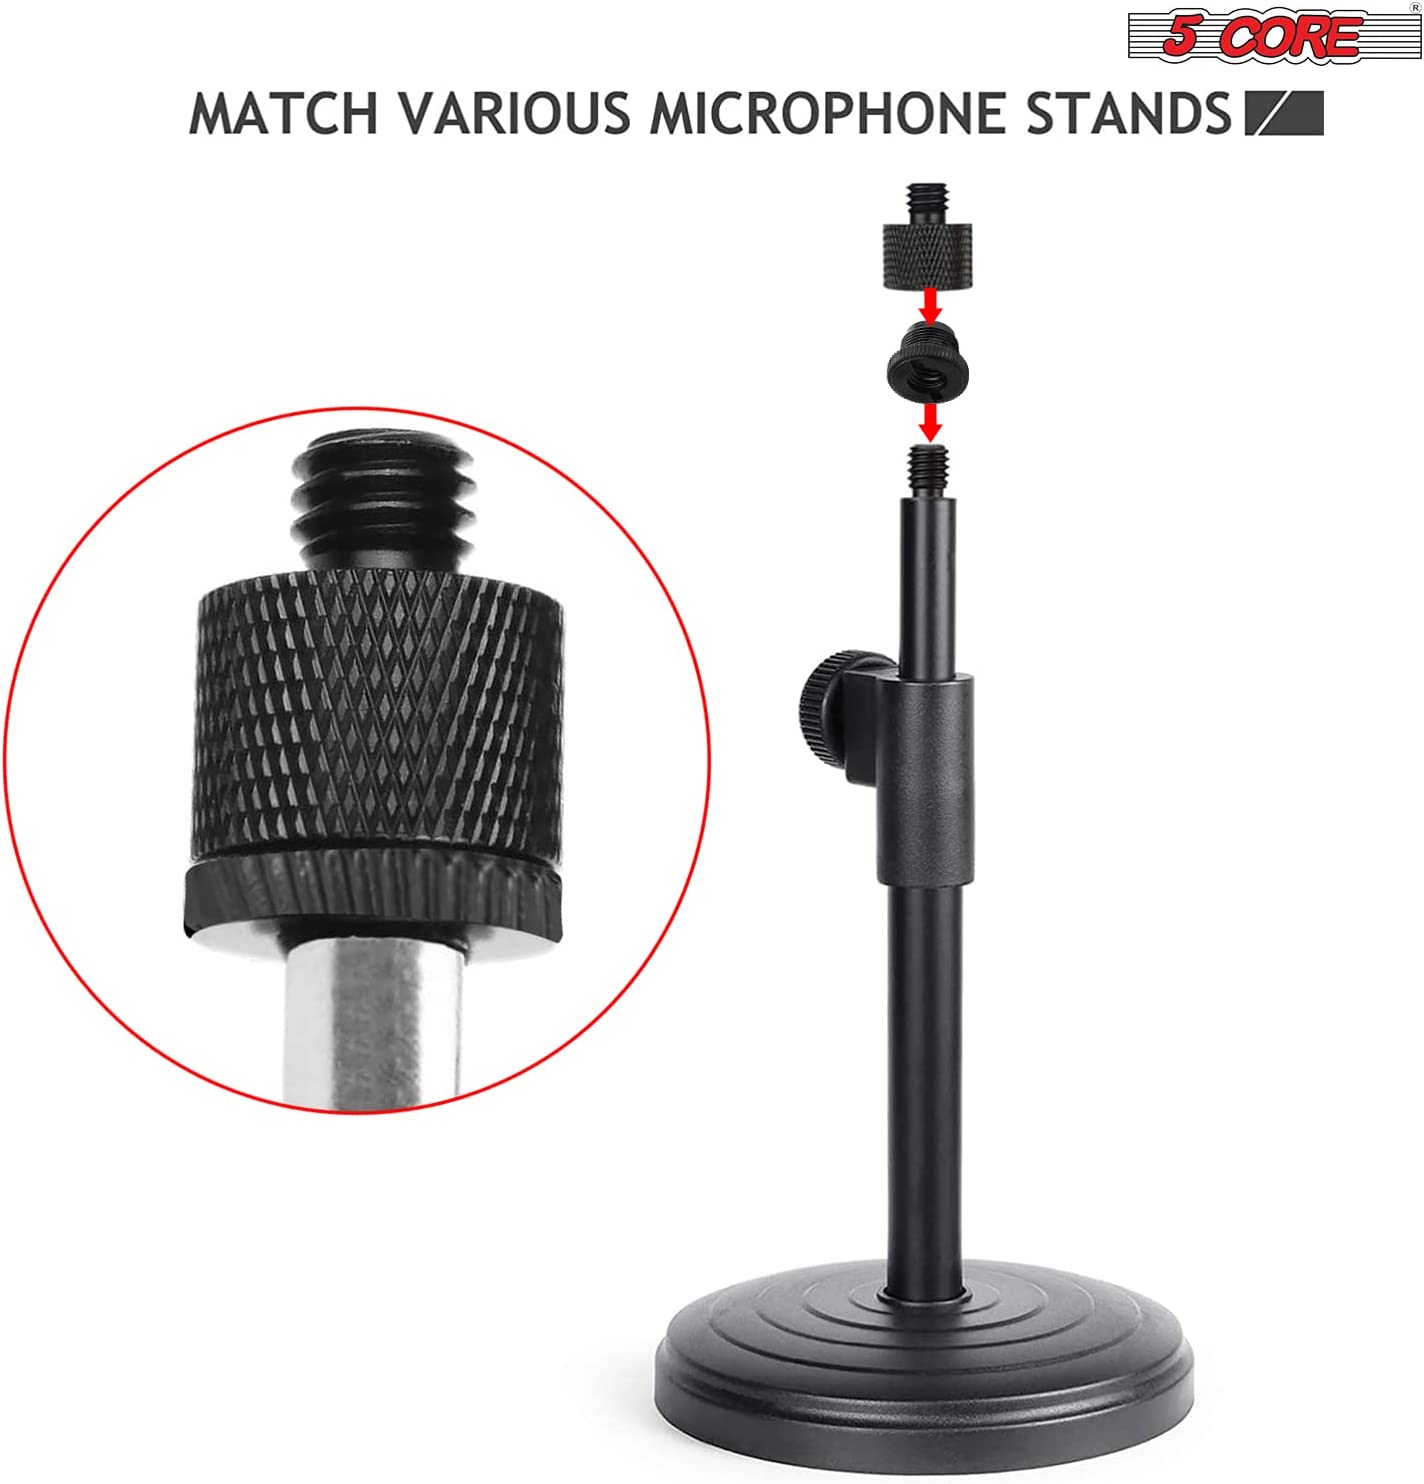 5 Core Mic Stand Adapter 4 Pieces Black 3/8 Female to 5/8 Male Plastic Mic Screw Adapter Microphone Tripod Stand Screw - MS ADP P BLK 4PCS-10